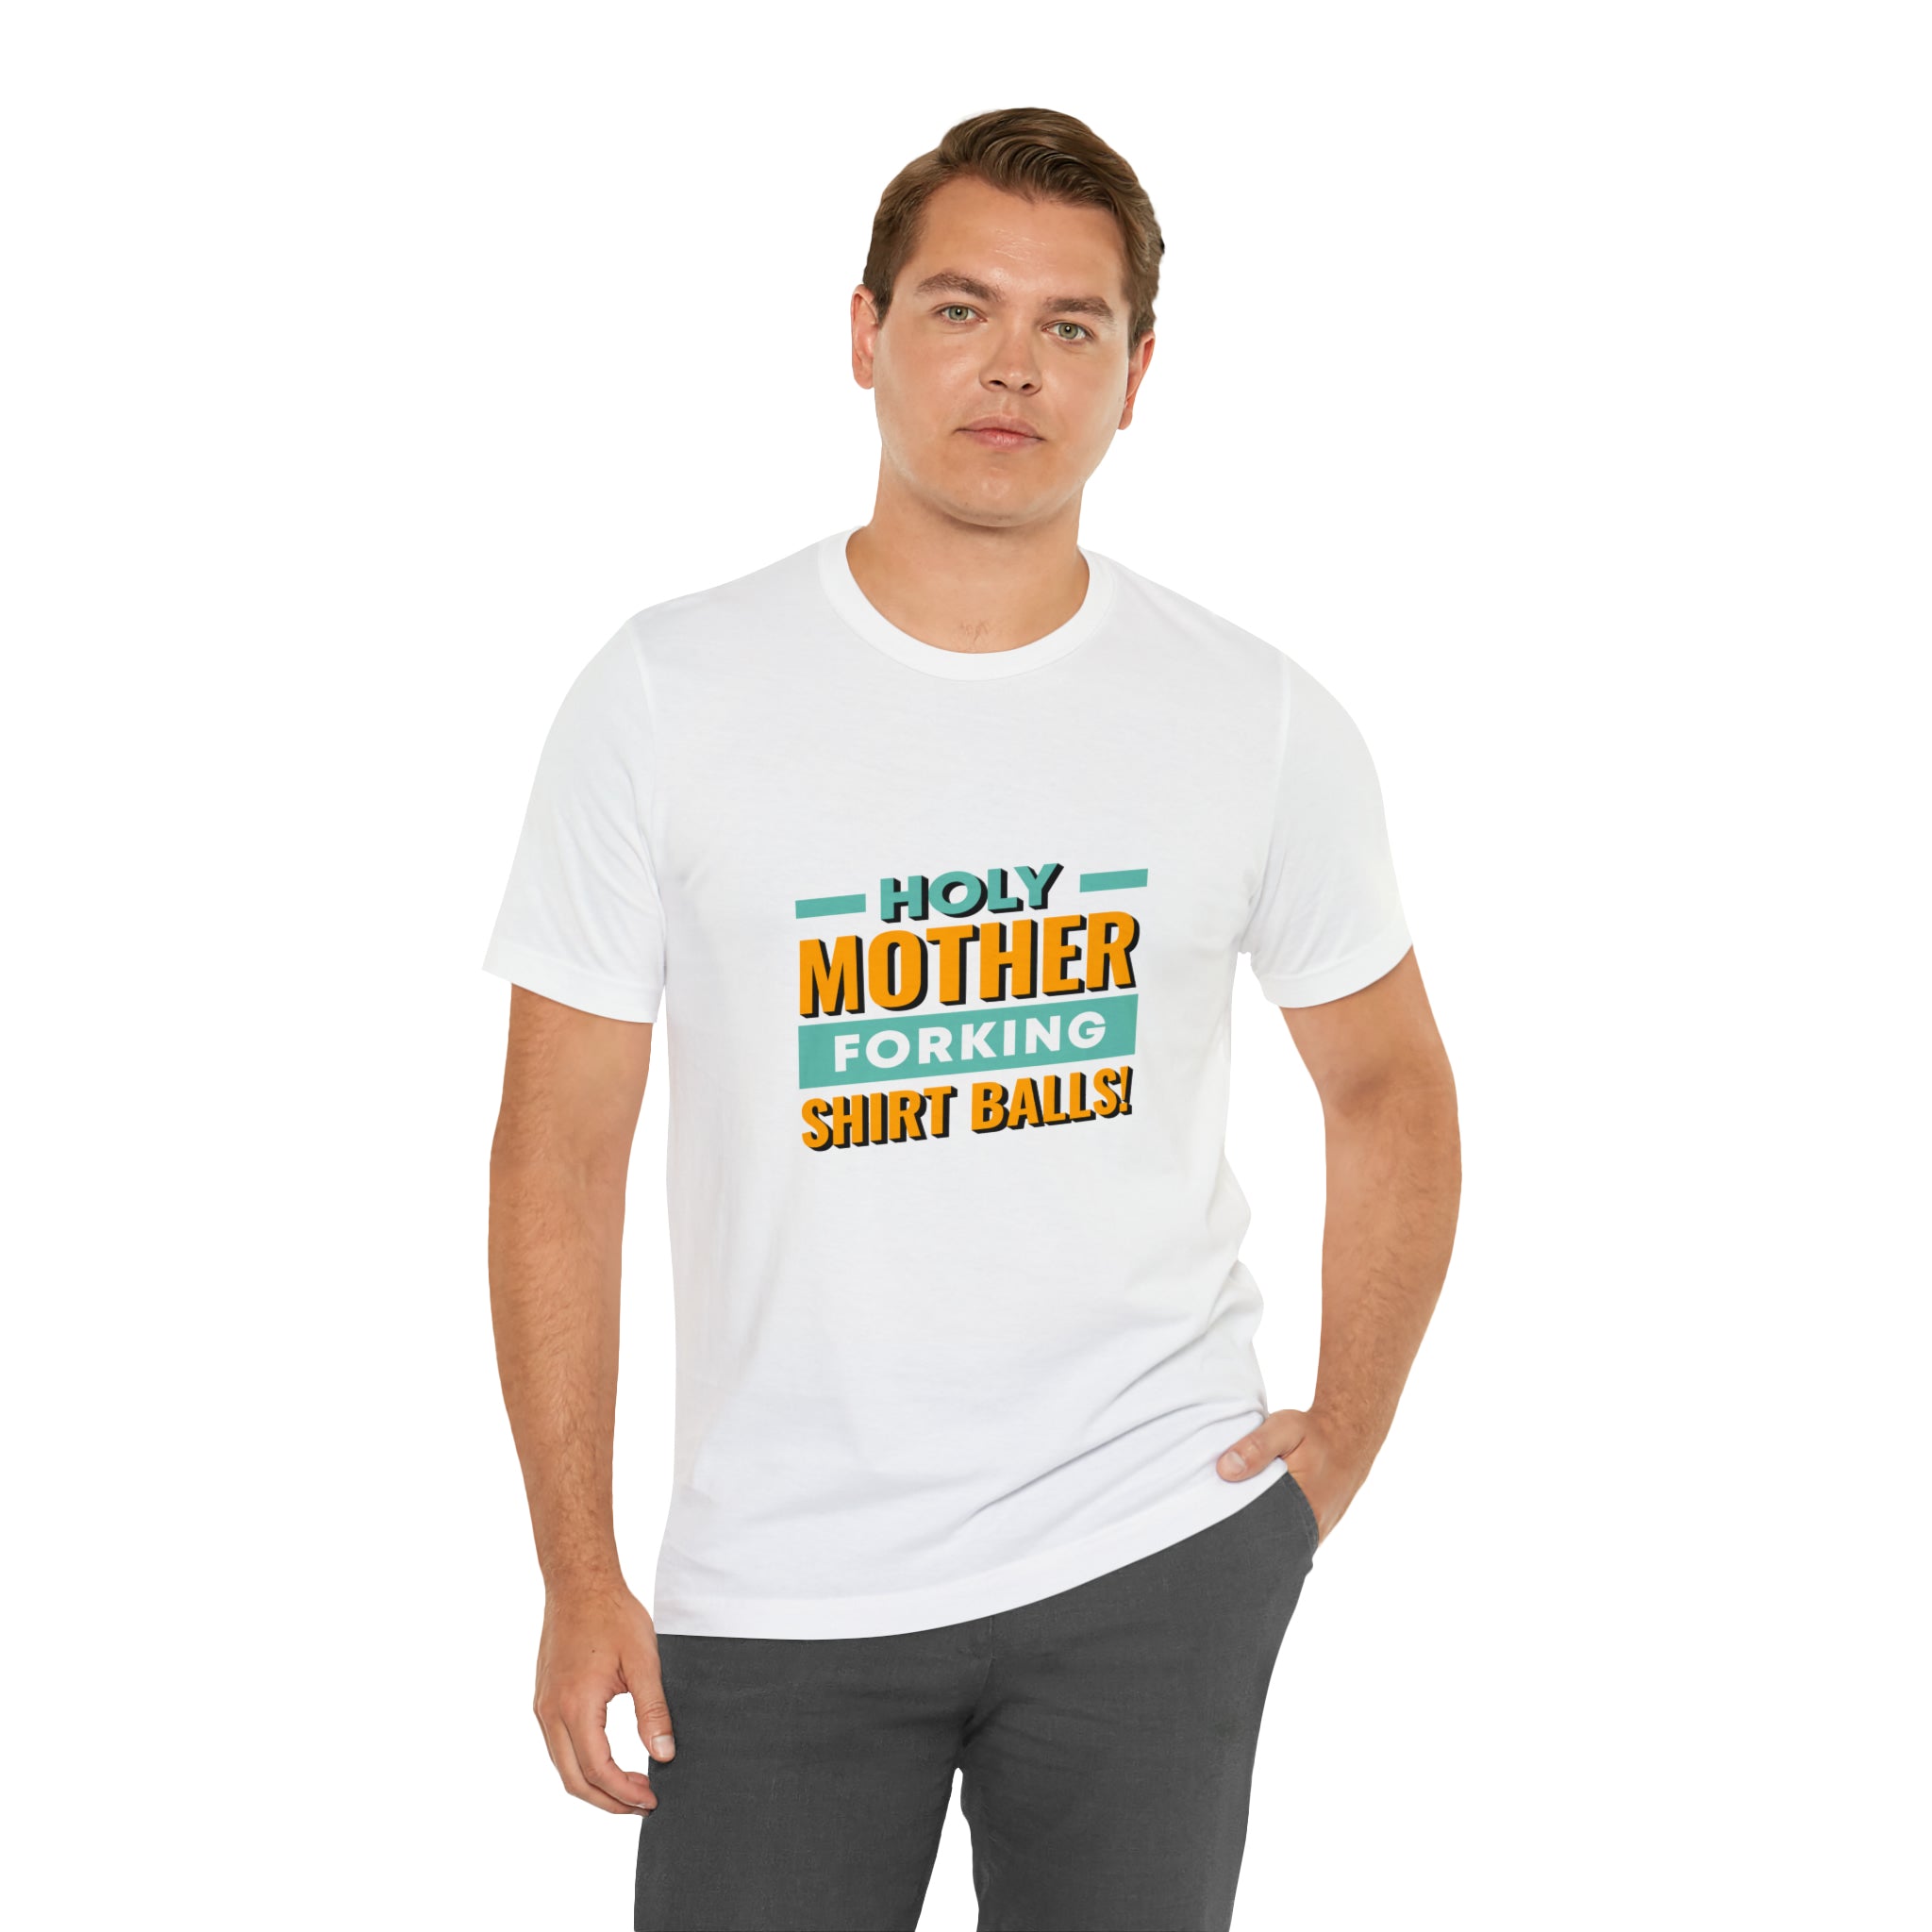 A man wearing a white t-shirt with the words 'my mother is sydney ballz' printed on it was seen. The t-shirt was a Holy mother T-Shirt by Printify.